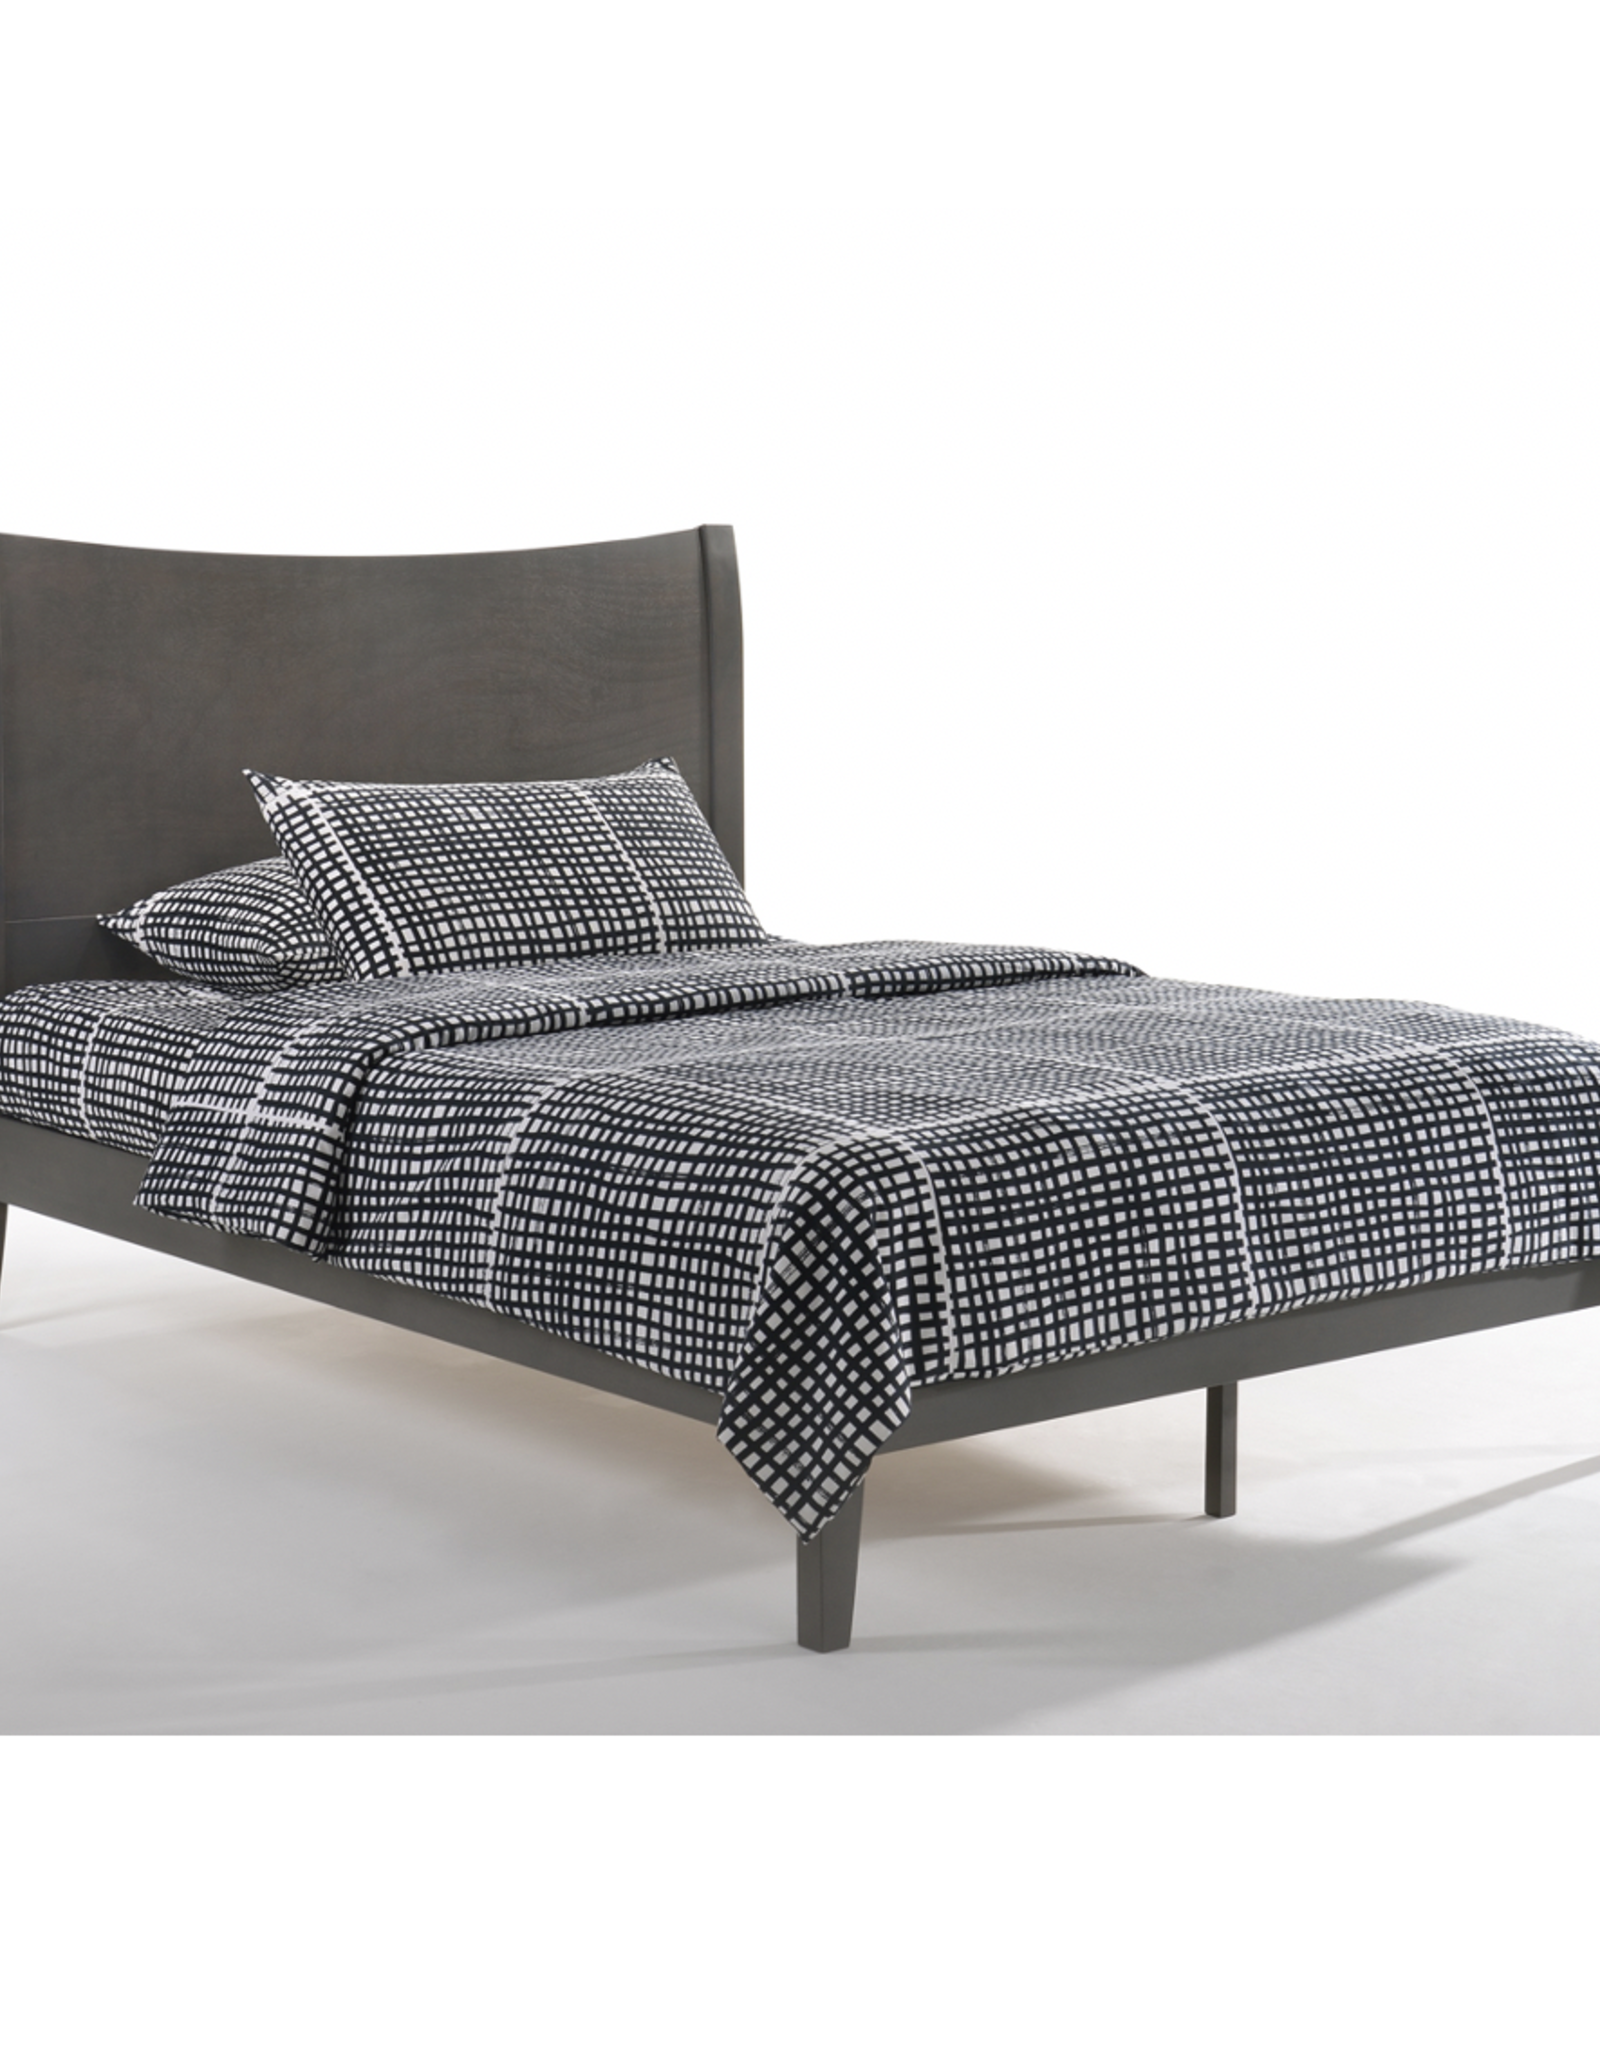 Blackpepper Platform Bed - Comes in Three Colors